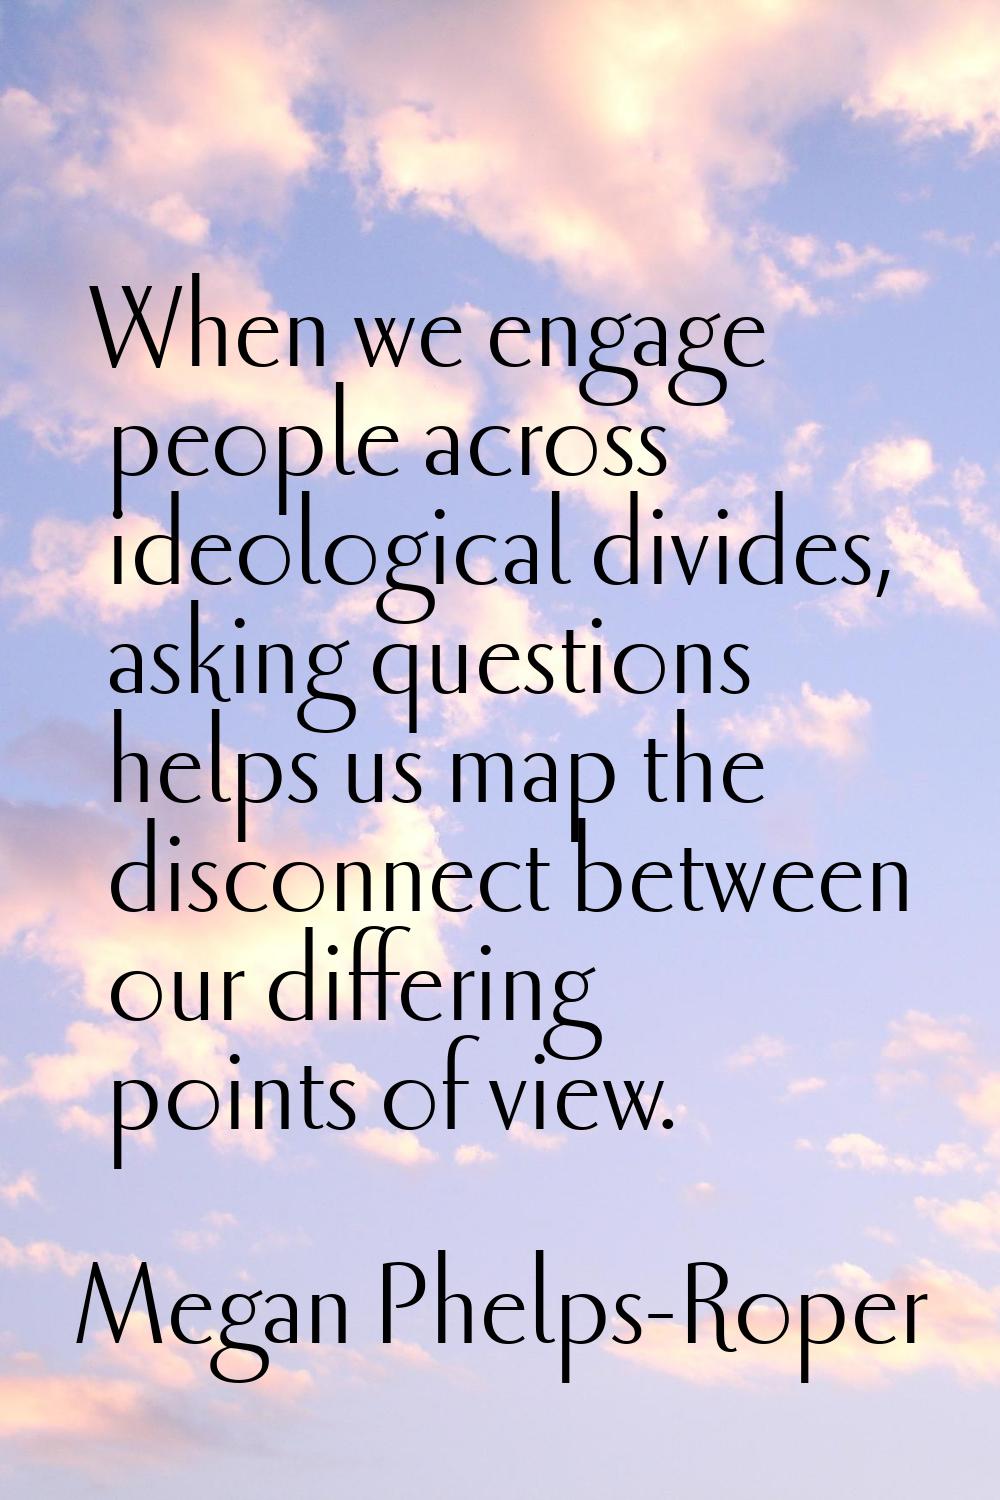 When we engage people across ideological divides, asking questions helps us map the disconnect betw